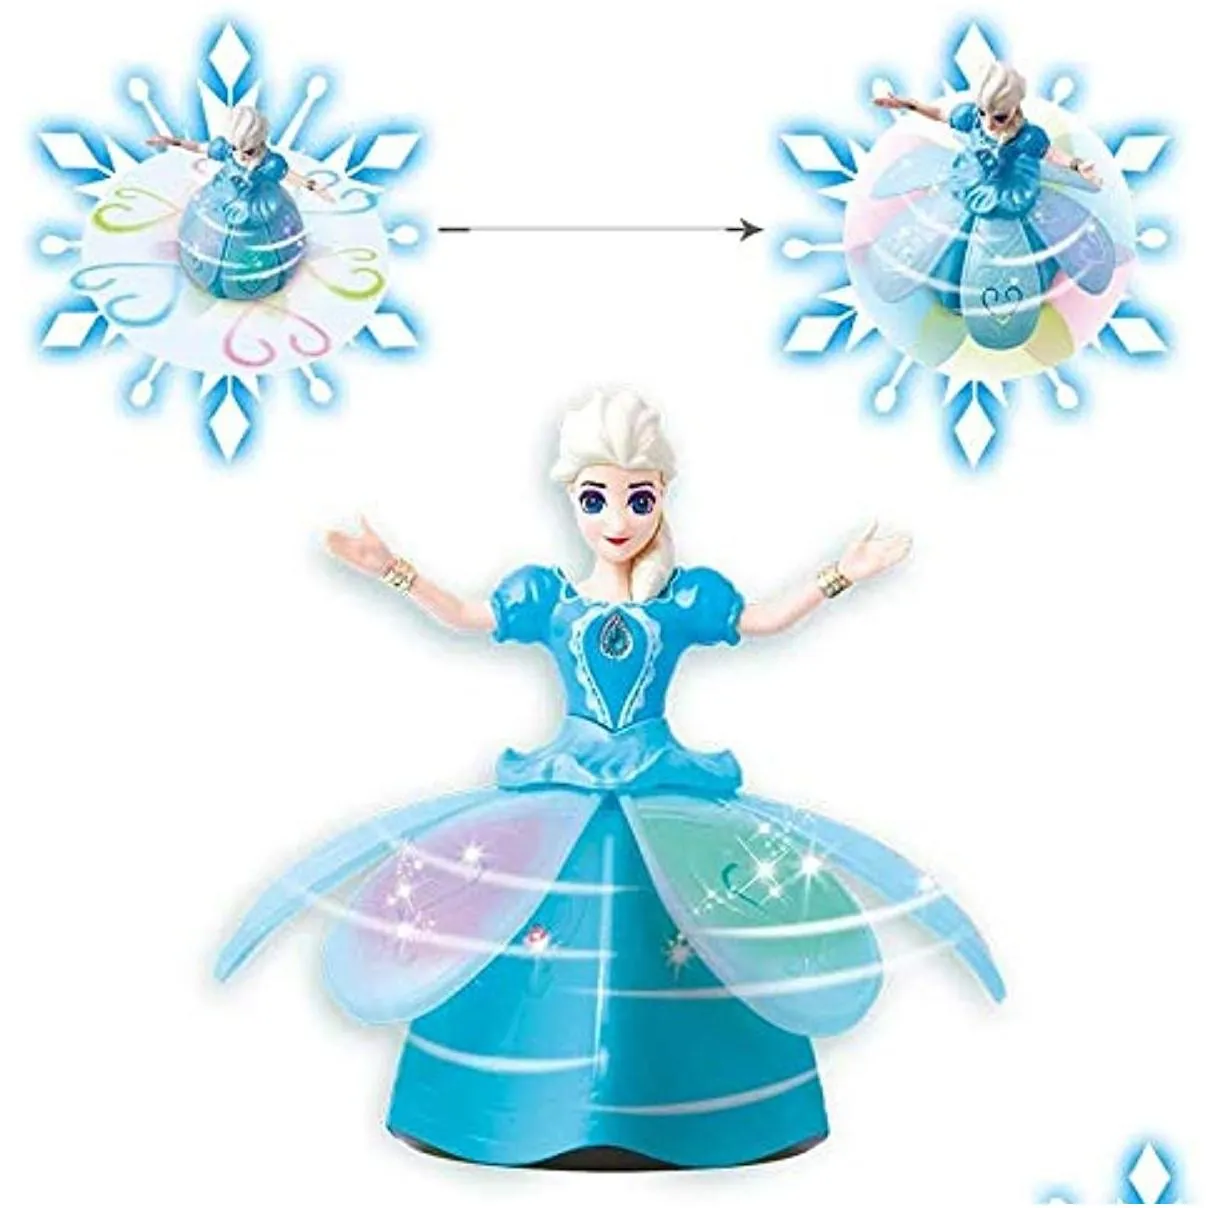 battery operated princess dolls toys for girls snow dance dancing doll flashing singing and rotating